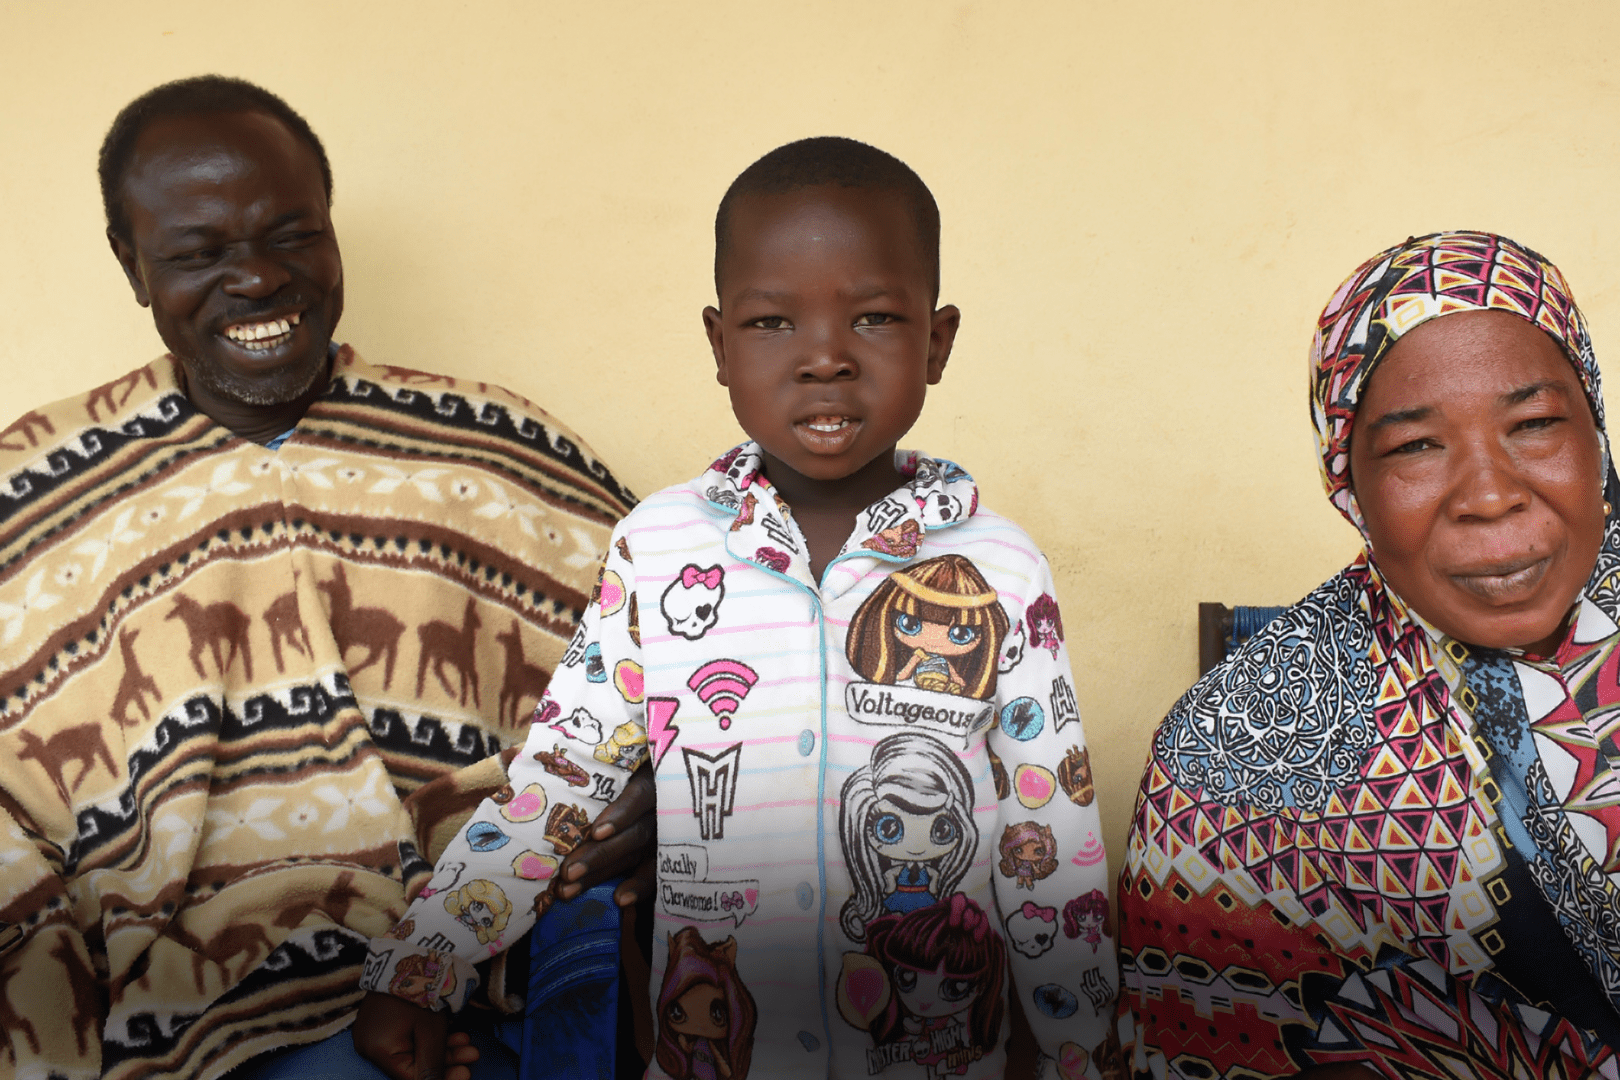 A photo of three people, Abdoul's father, Abdoul, and Abdoul's mother. Abdoul's father on the left is smiling towards Abdoul. Abdoul is looking at the camera with an open mouth and standing. Abdoul's mother is smiling closed-mouth to the camera.